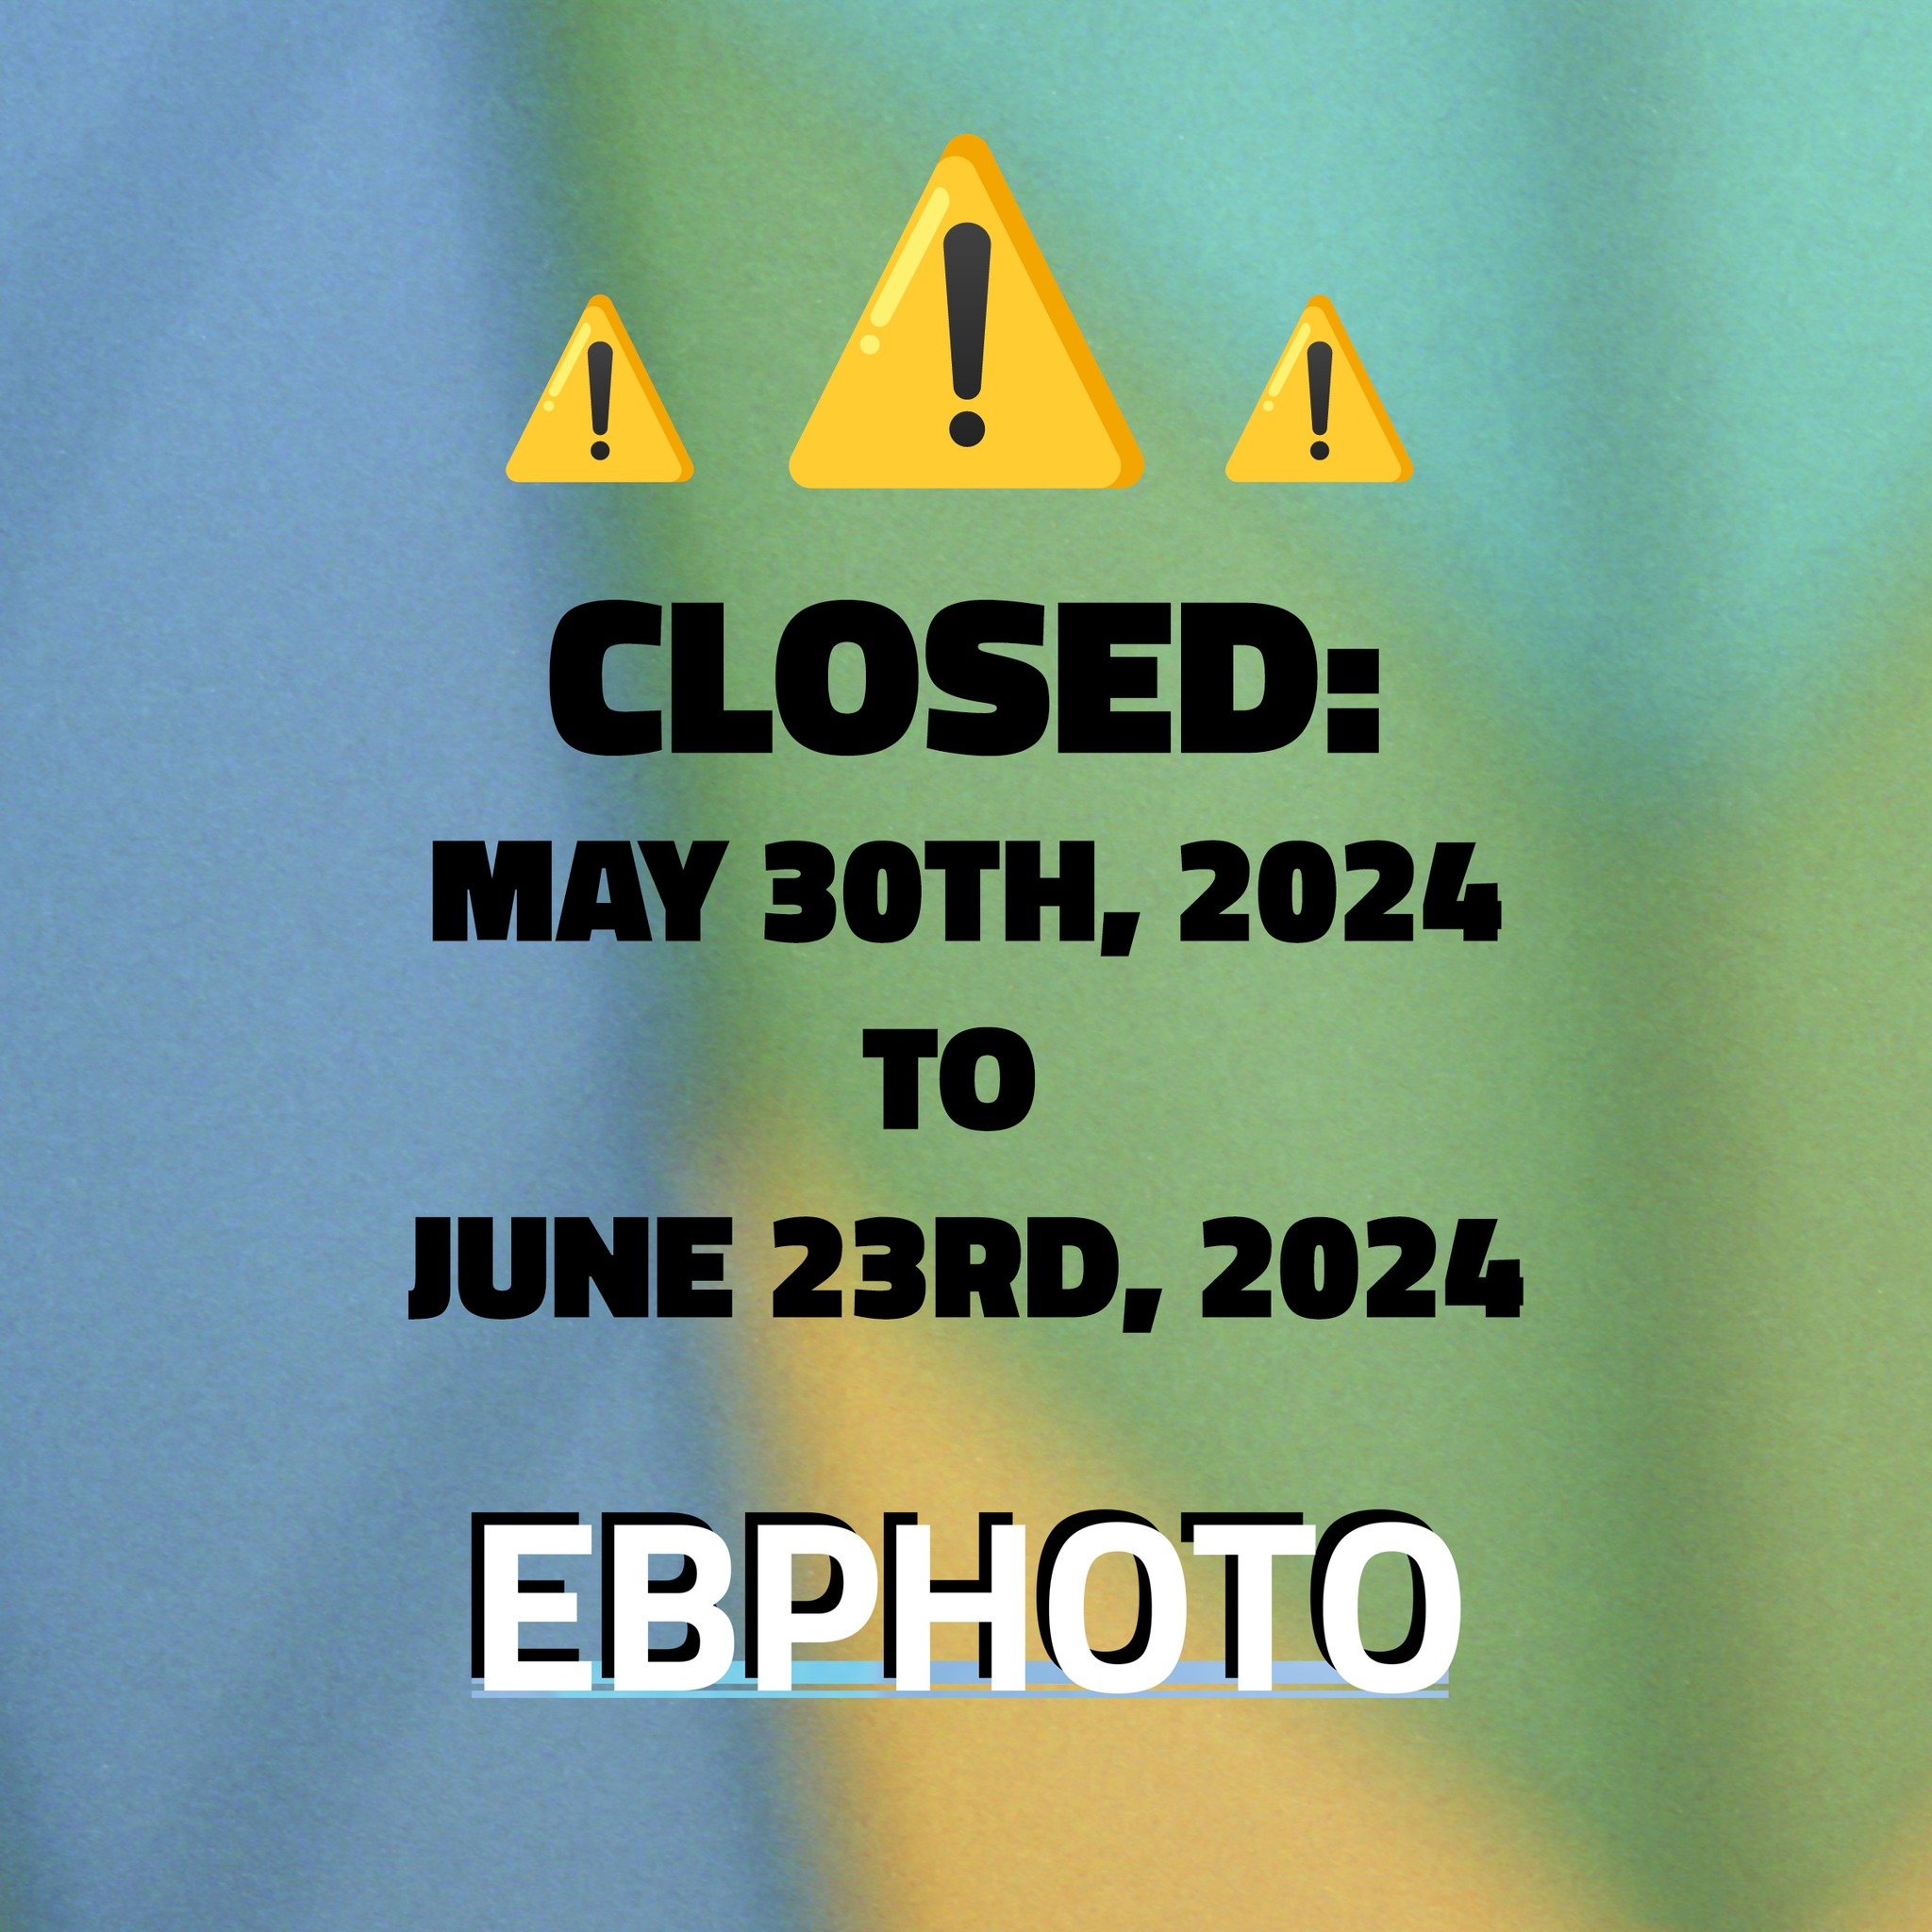 CLOSED: May 30th, 2024 to June 23rd, 2024

Heads up! We'll be closed for a bit for a photo adventure out of town. There's still time to take care of your printing and scanning needs before we leave... let us know how we can help!

ebphotollc.com